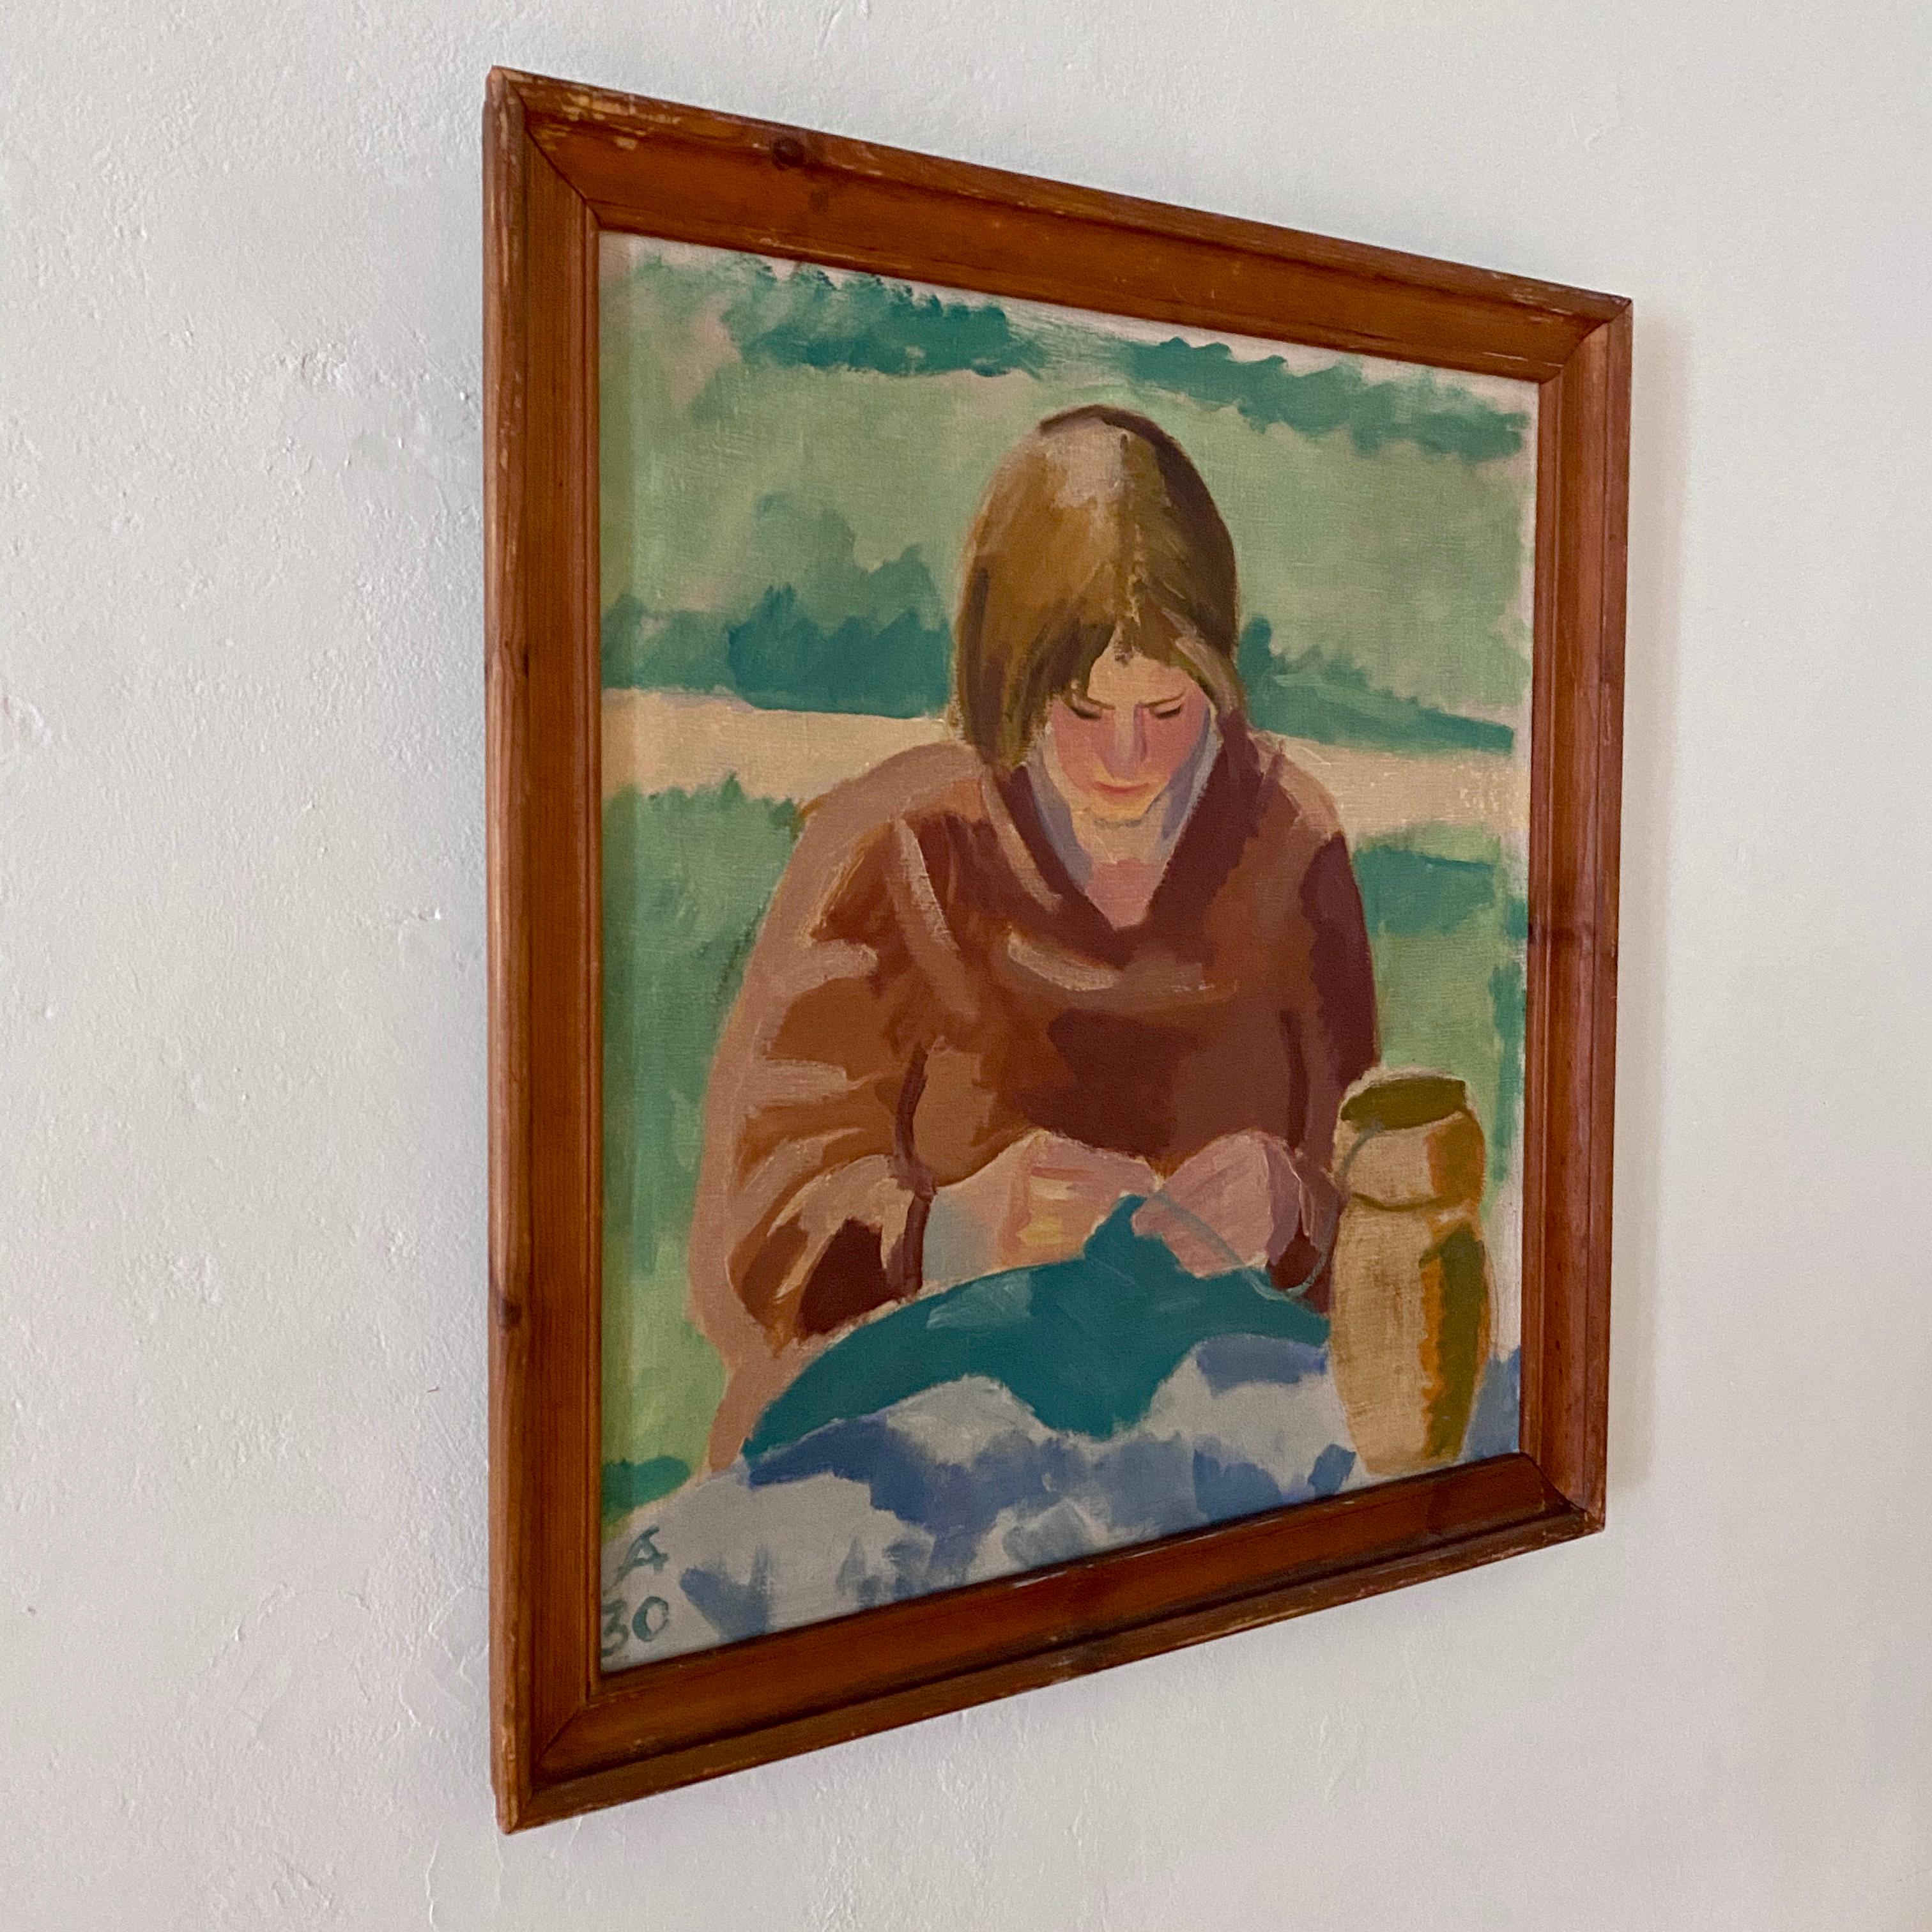 This midcentury Scandinavian oil painting of a woman working has its original frame and was painted in Denmark in the 1960s. 
A unique piece which is a great eyecatcher for your antique, modern, Space Age or midcentury interior.